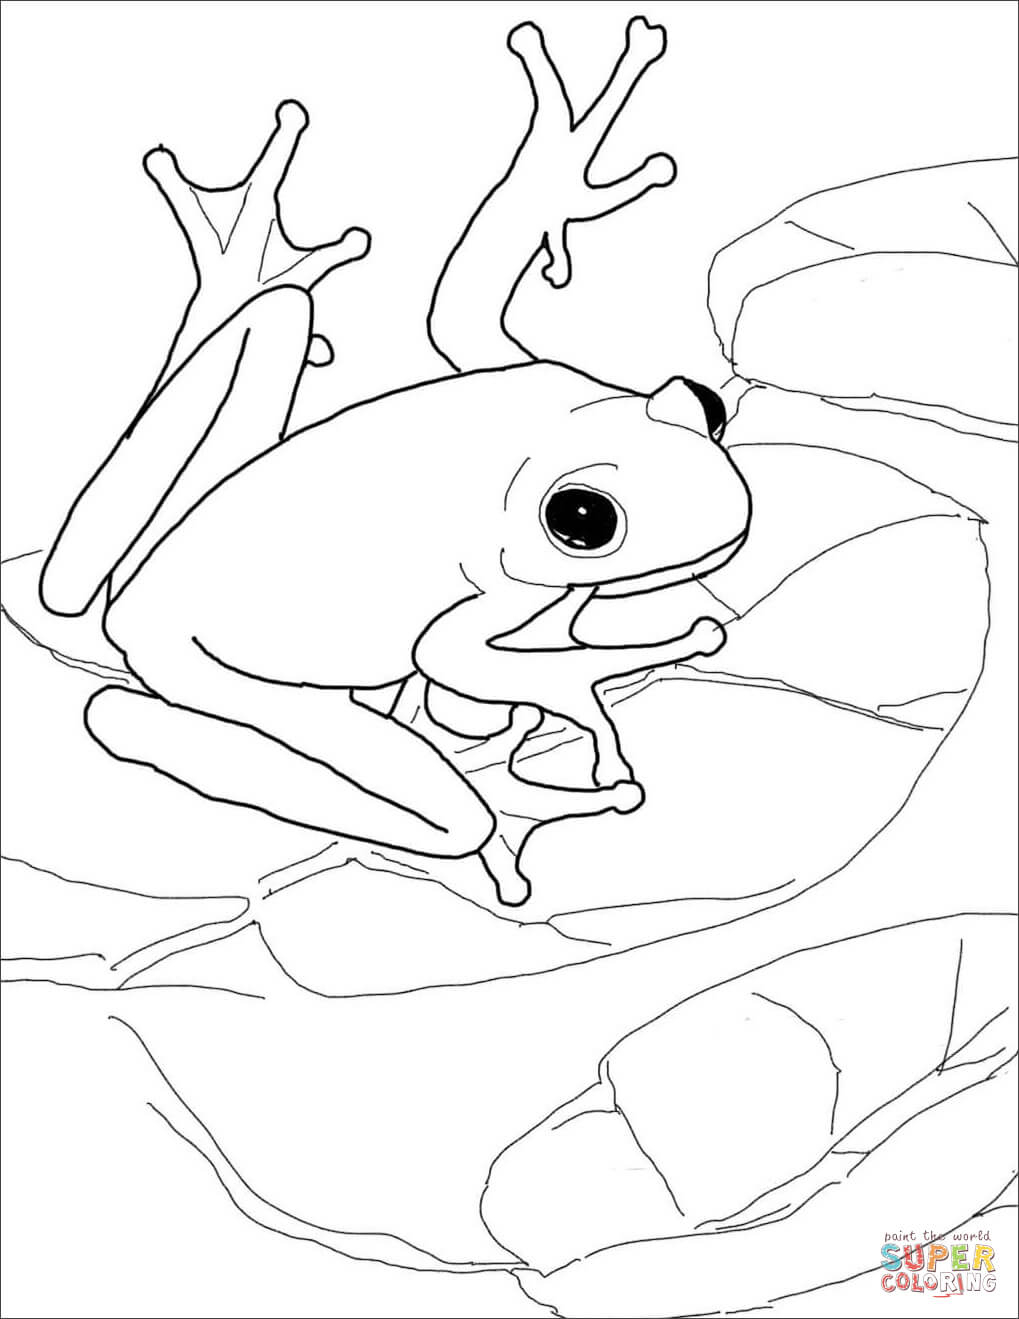 American Green Tree Frog Coloring Page | Free Printable Coloring Pages - Printable Frog Puzzle